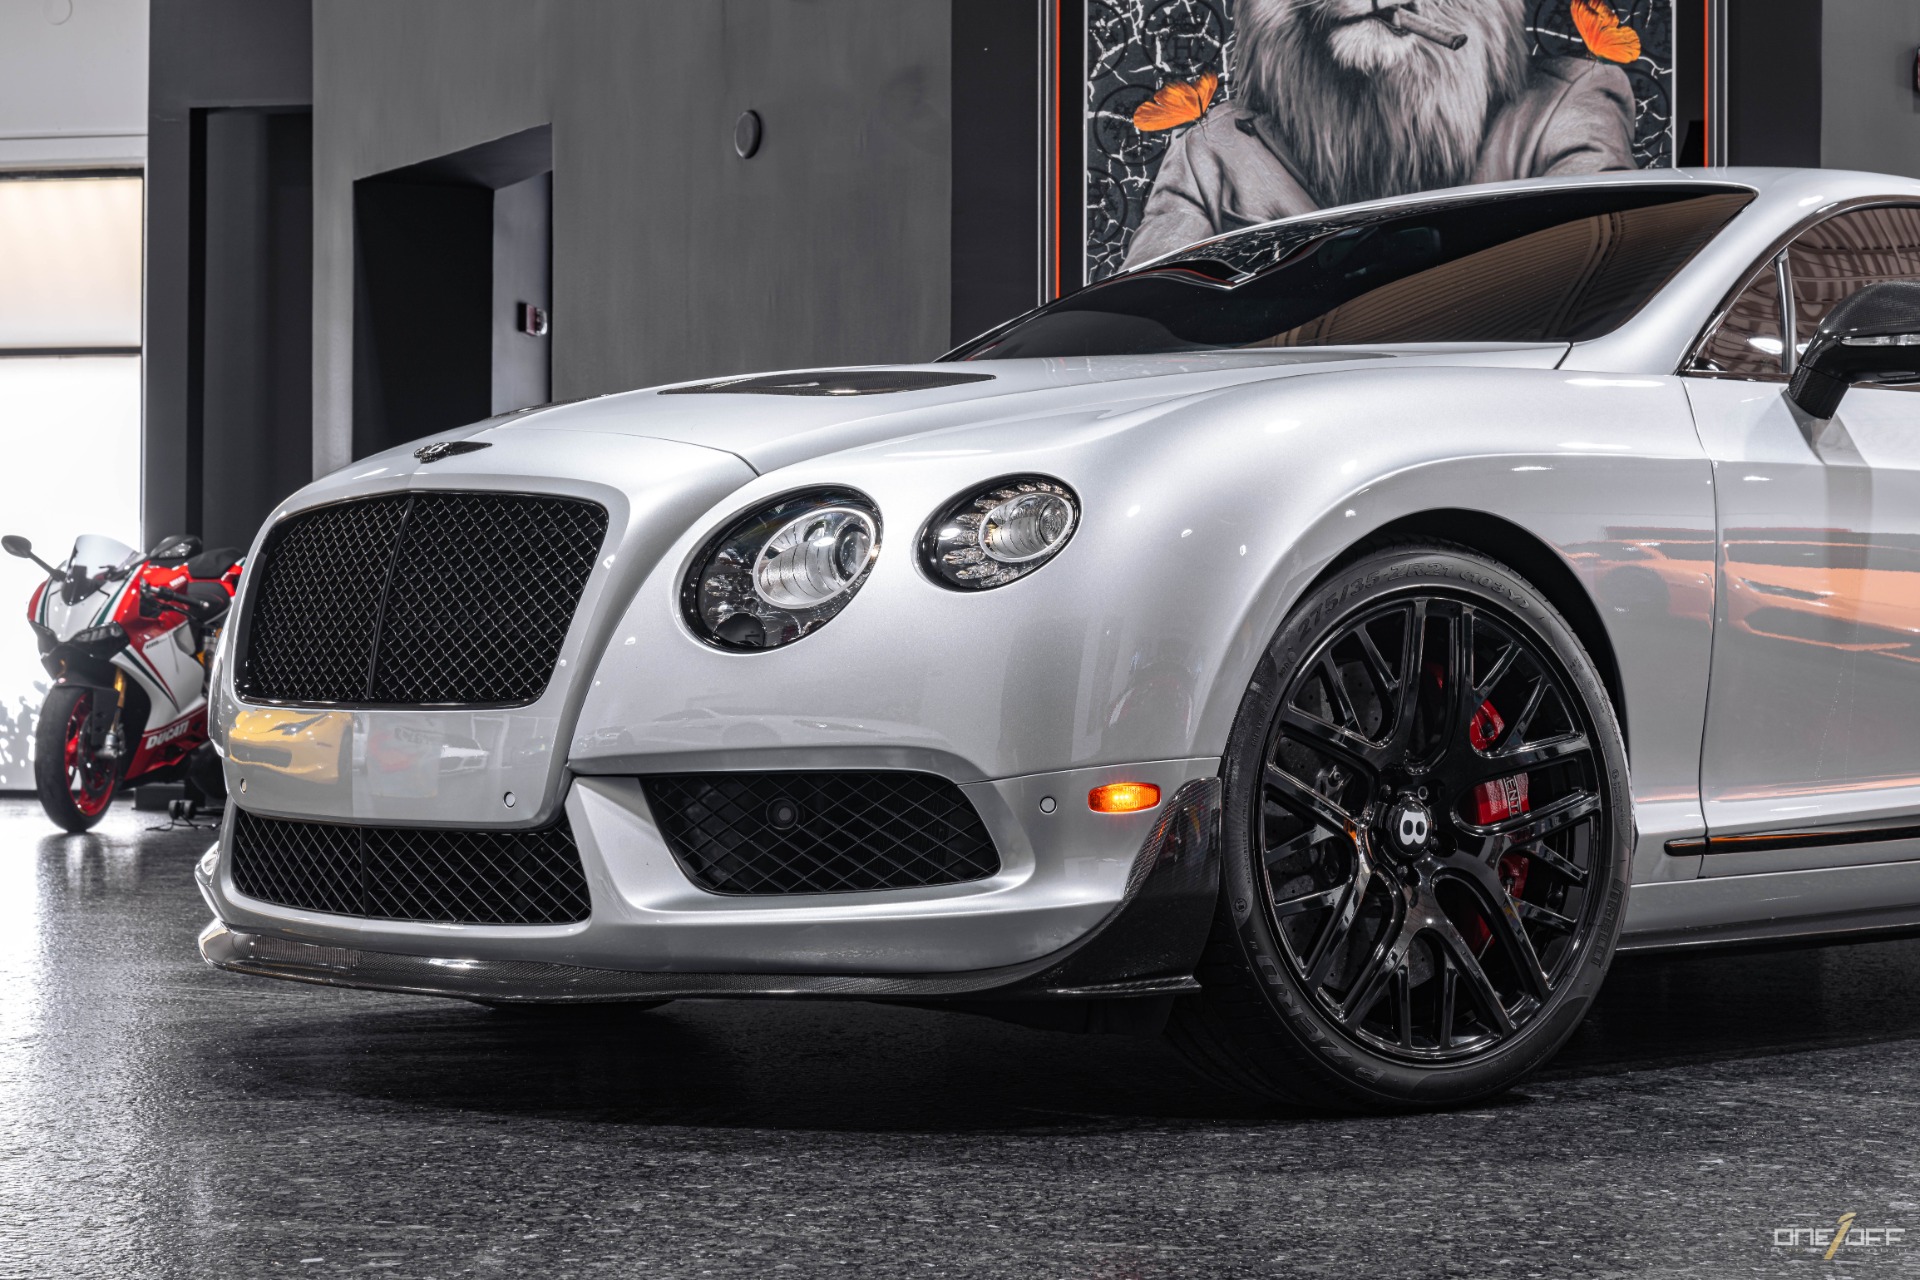 Used 2015 Bentley Continental GT3-R #14 of 99 + ONLY Silver Silver ...